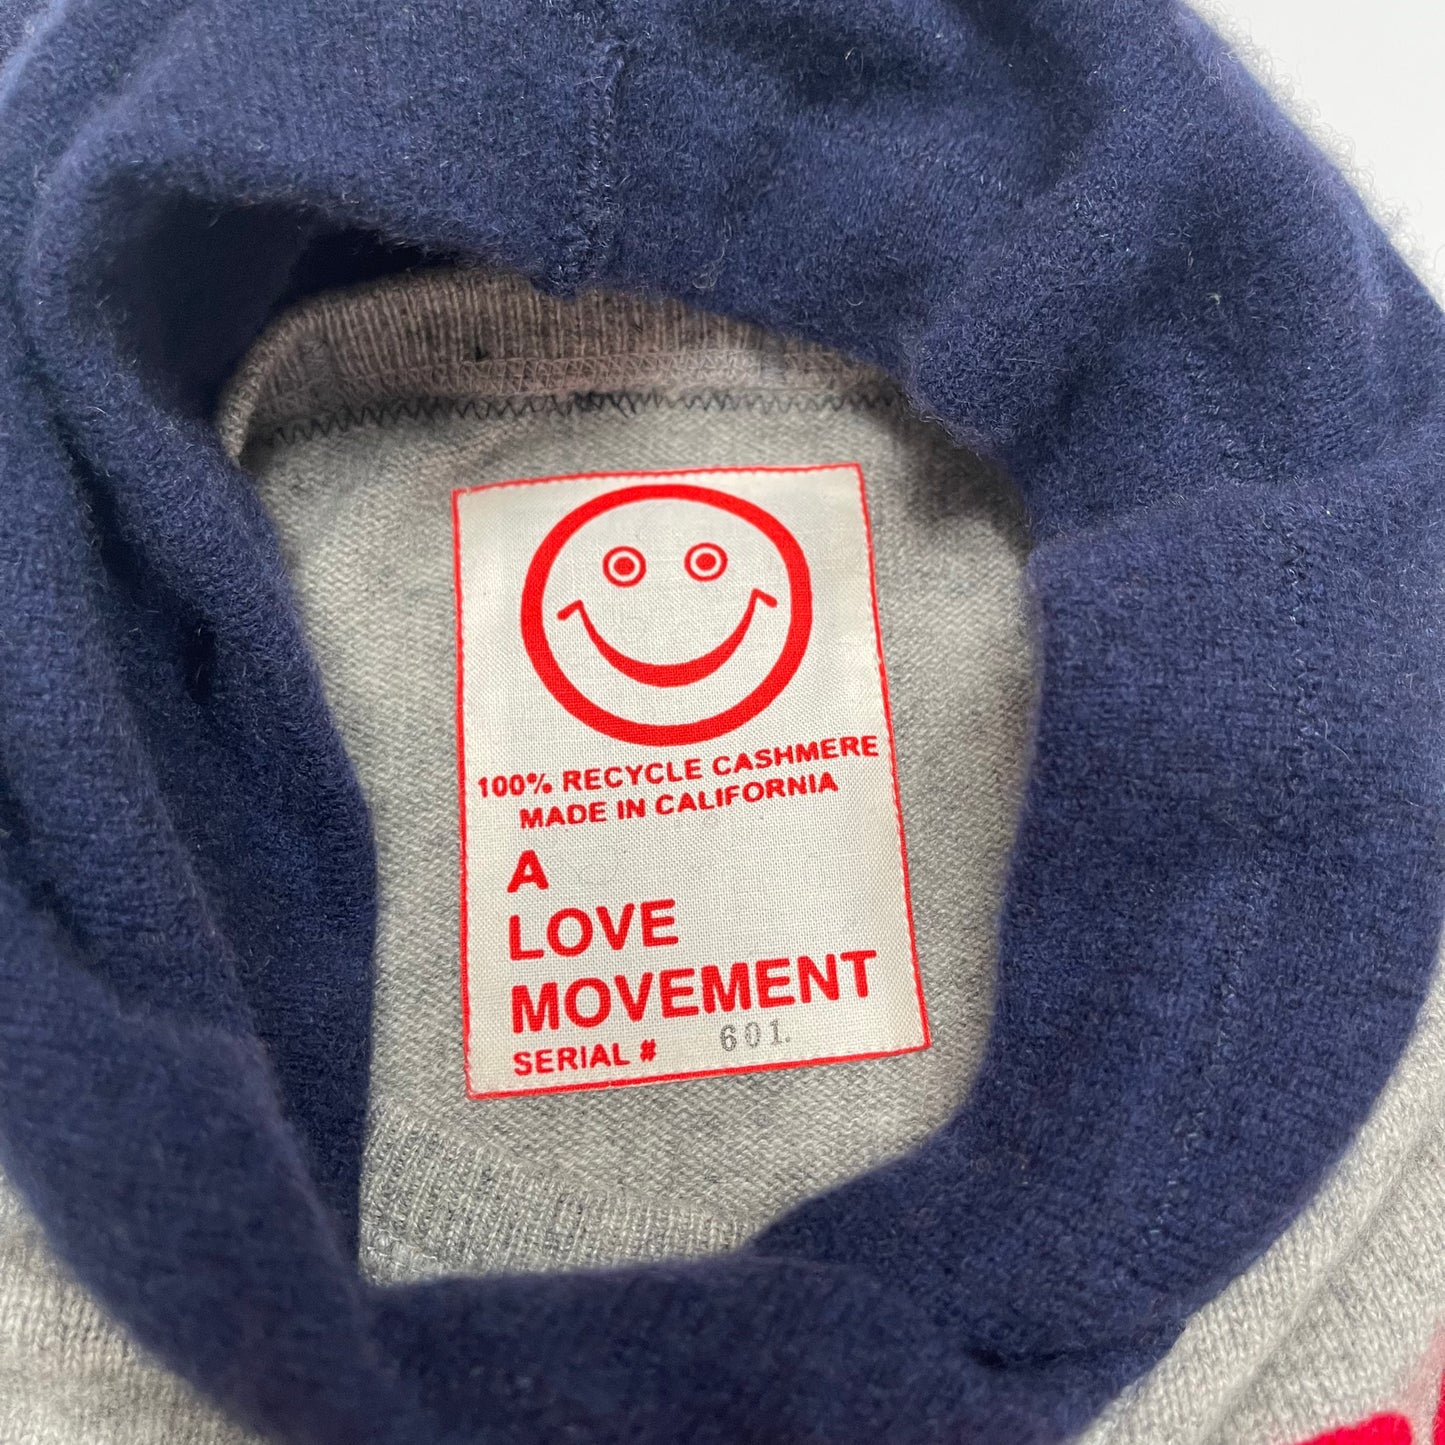 A LOVE MOVEMENT CASHMERE HOODIE SWEATER